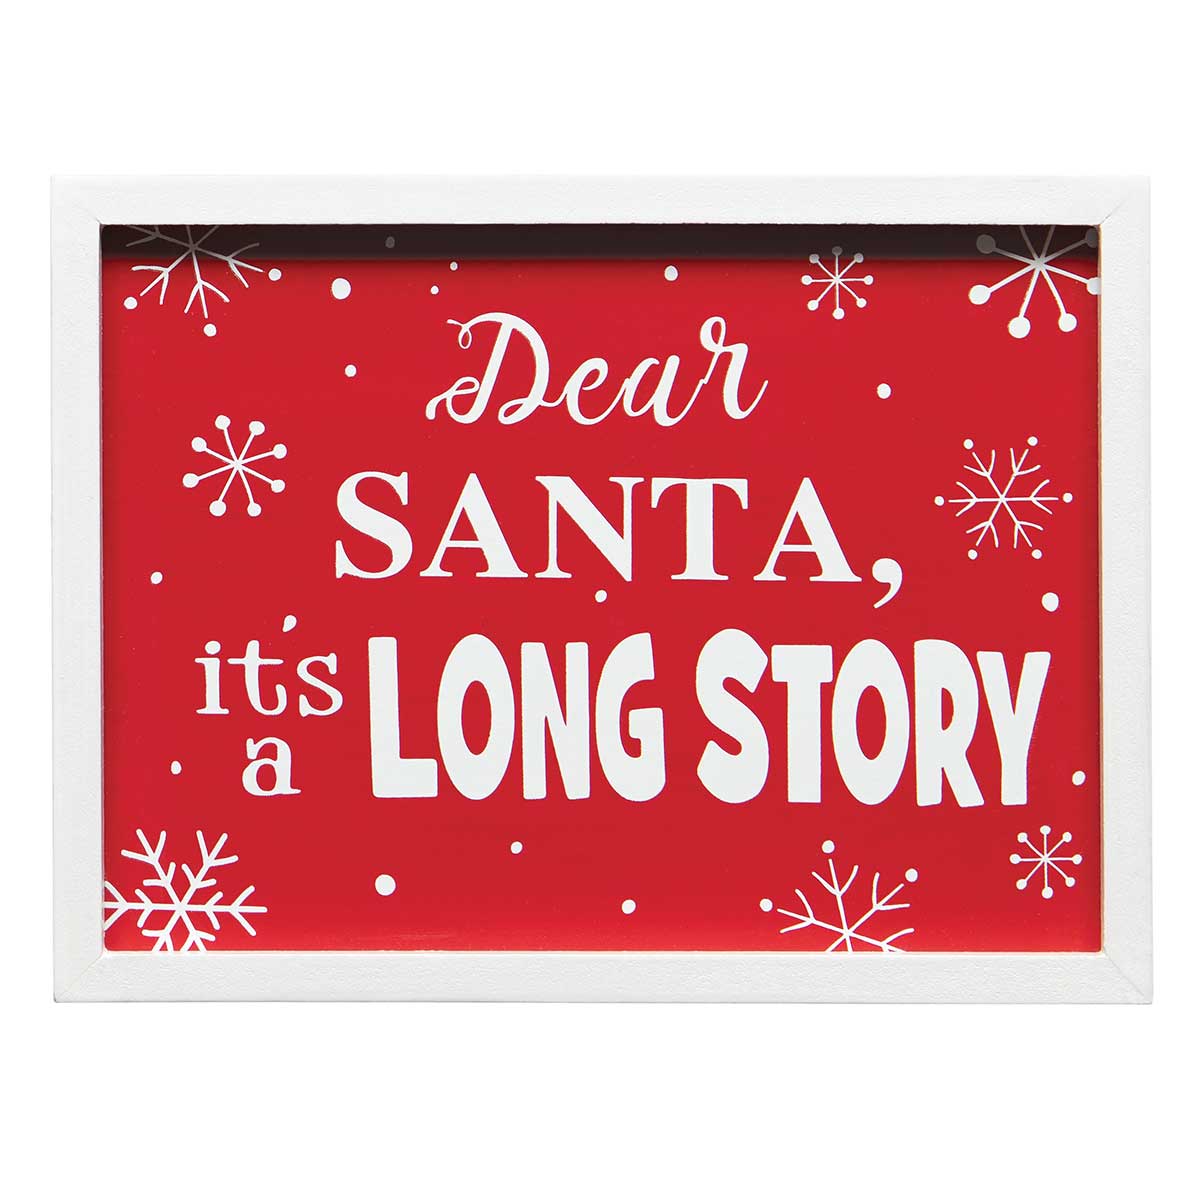 Dear Santa, it's a Long Story Rectangular Woodn Sign Red/White